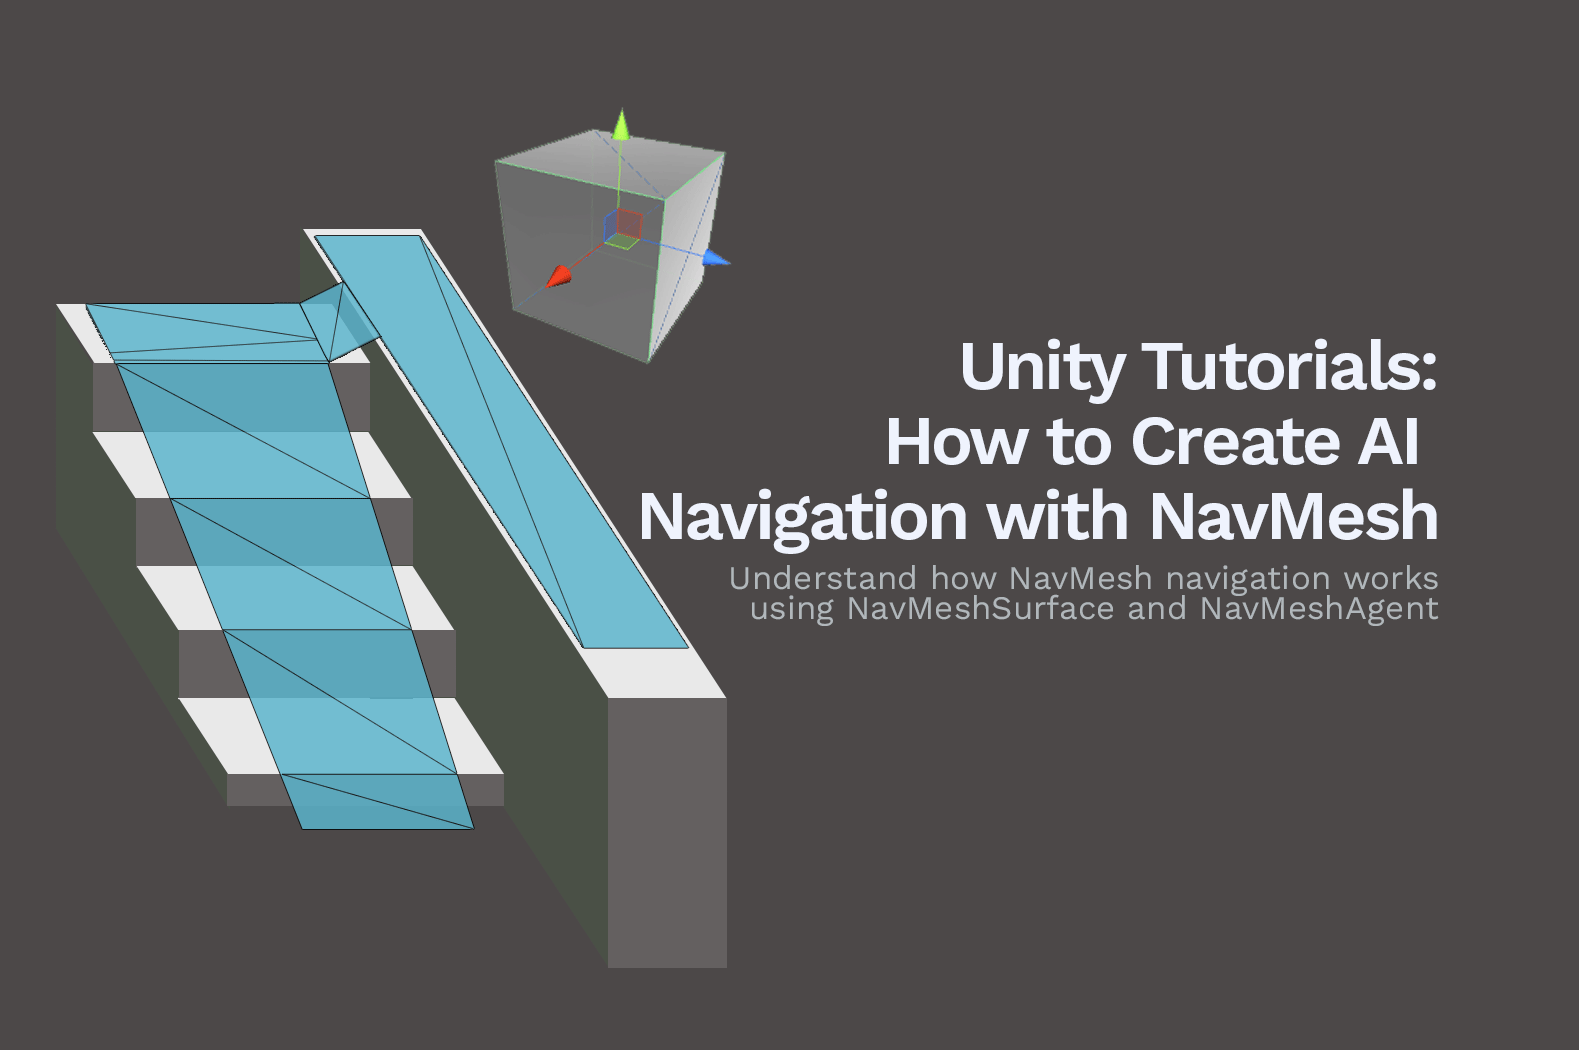 Unity Tutorial: How to Create AI Navigation with NavMesh